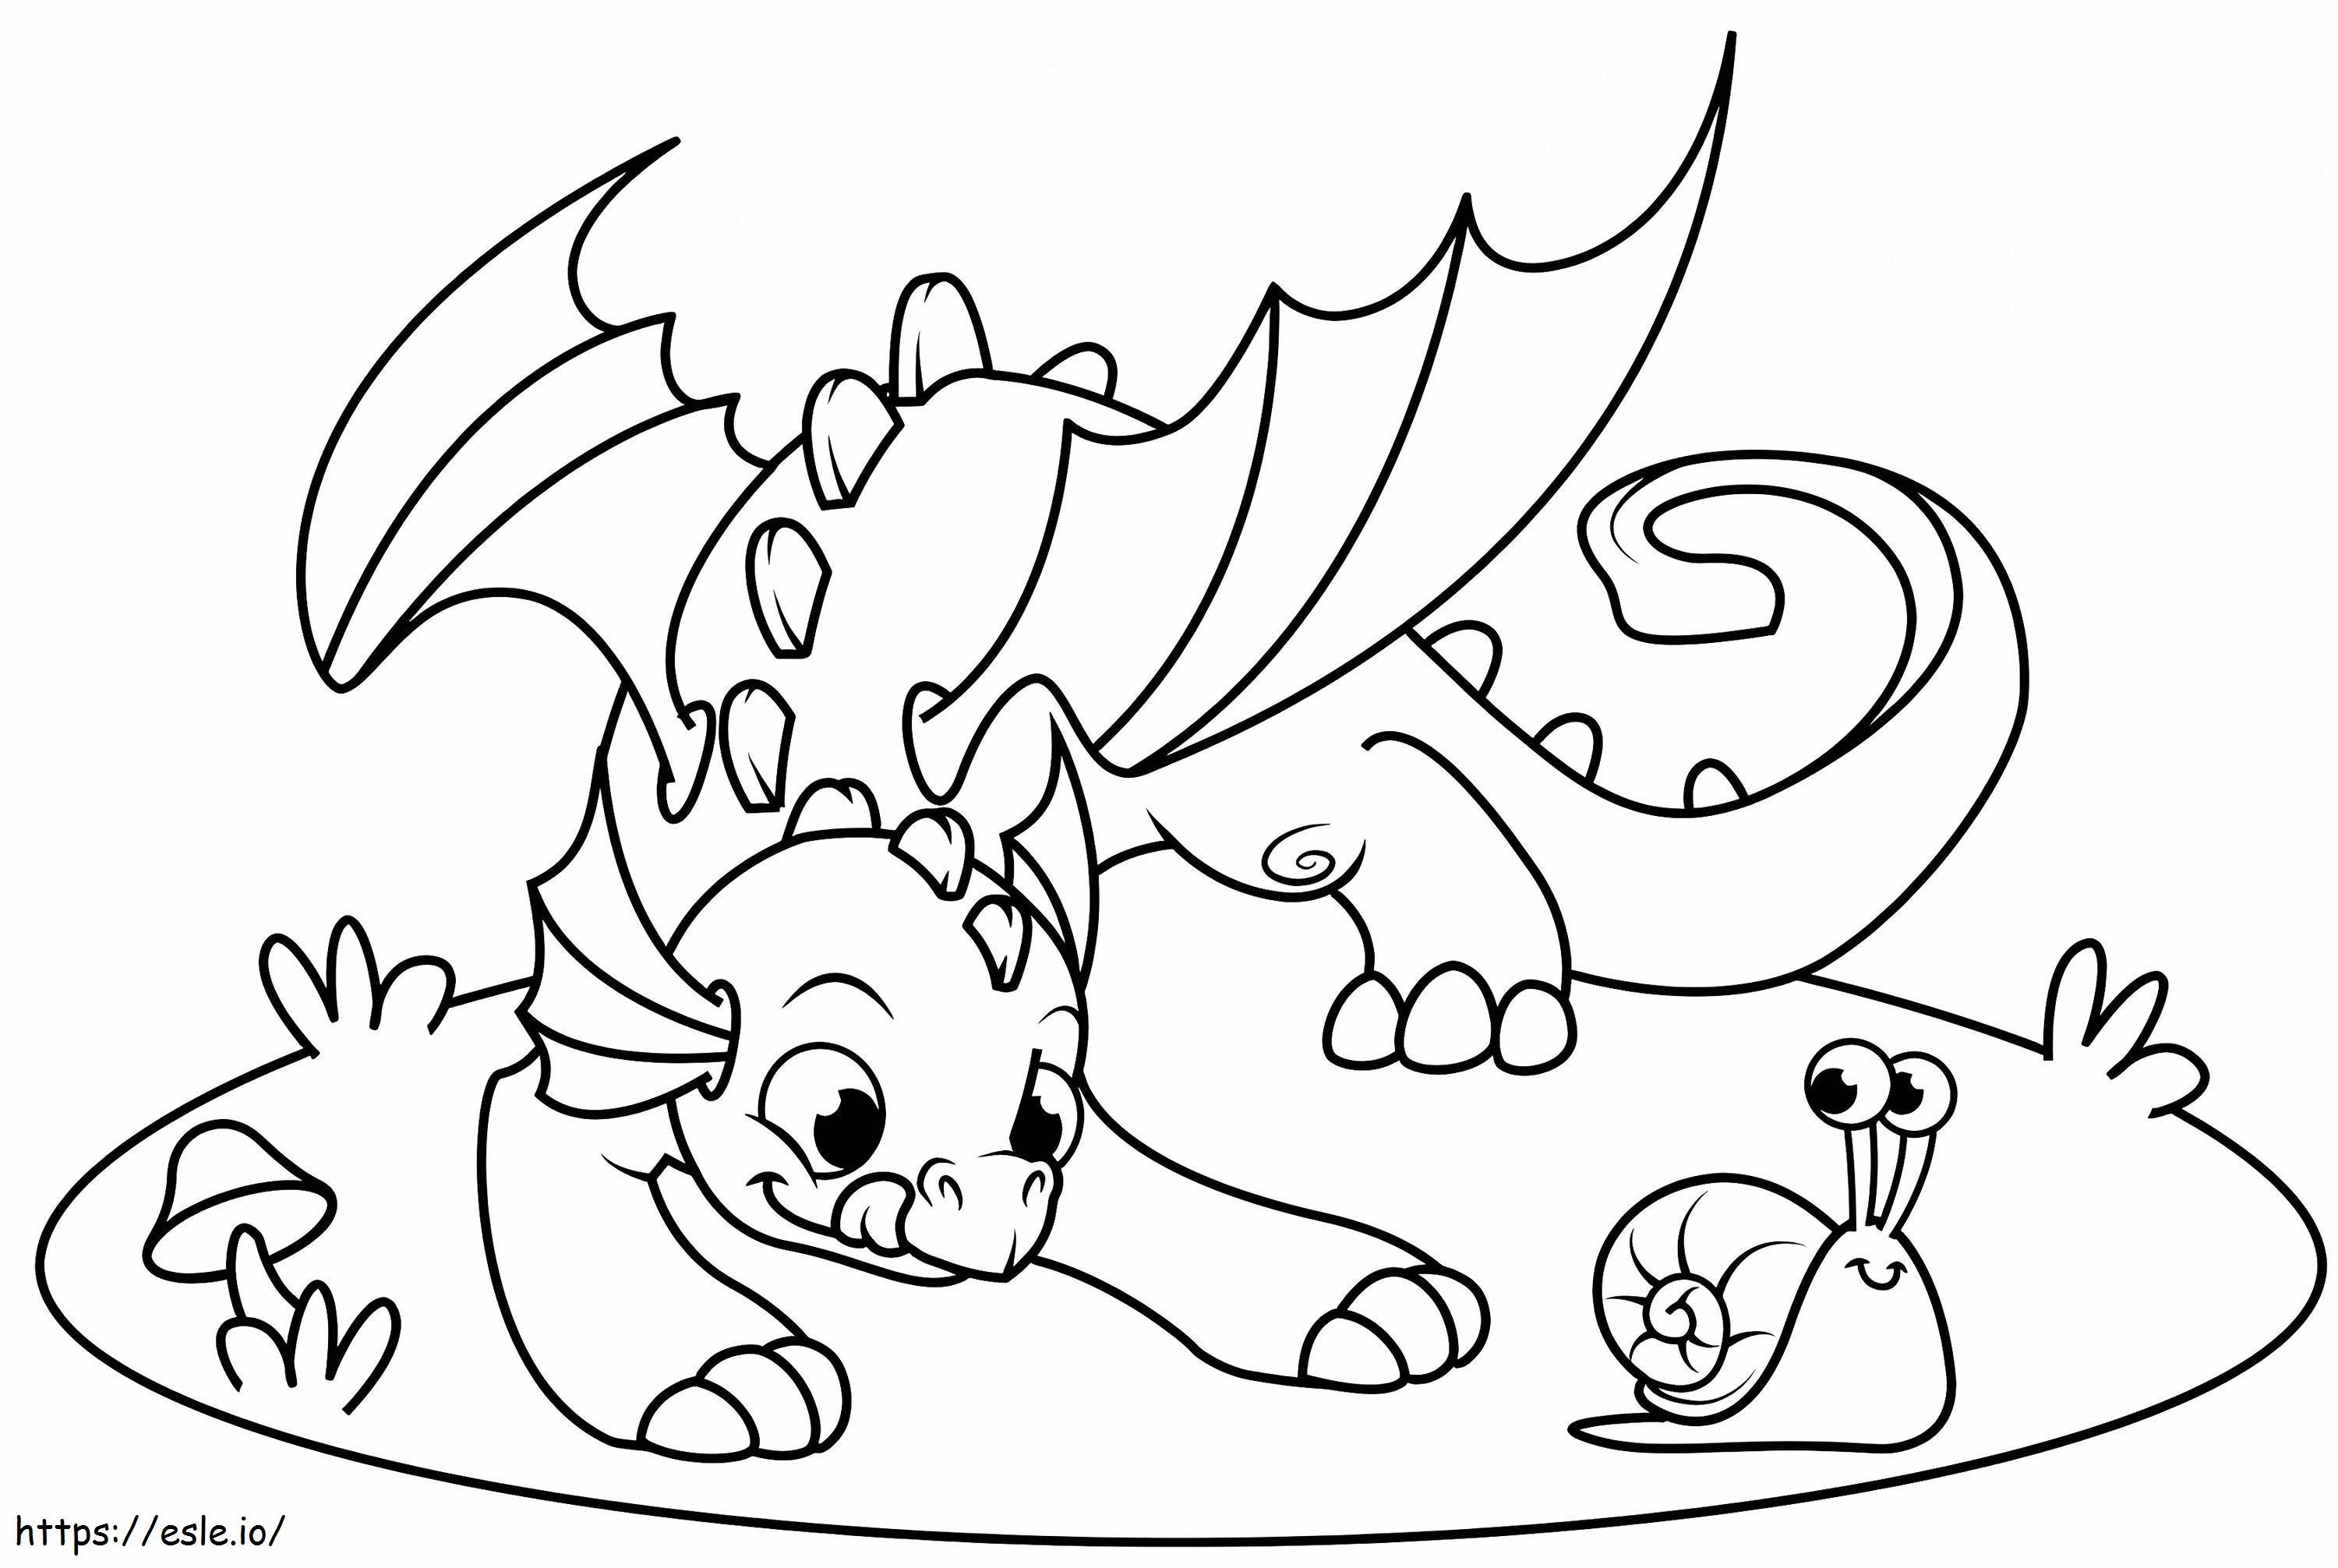 1559783326 Cute Dragon With Snail A4 coloring page